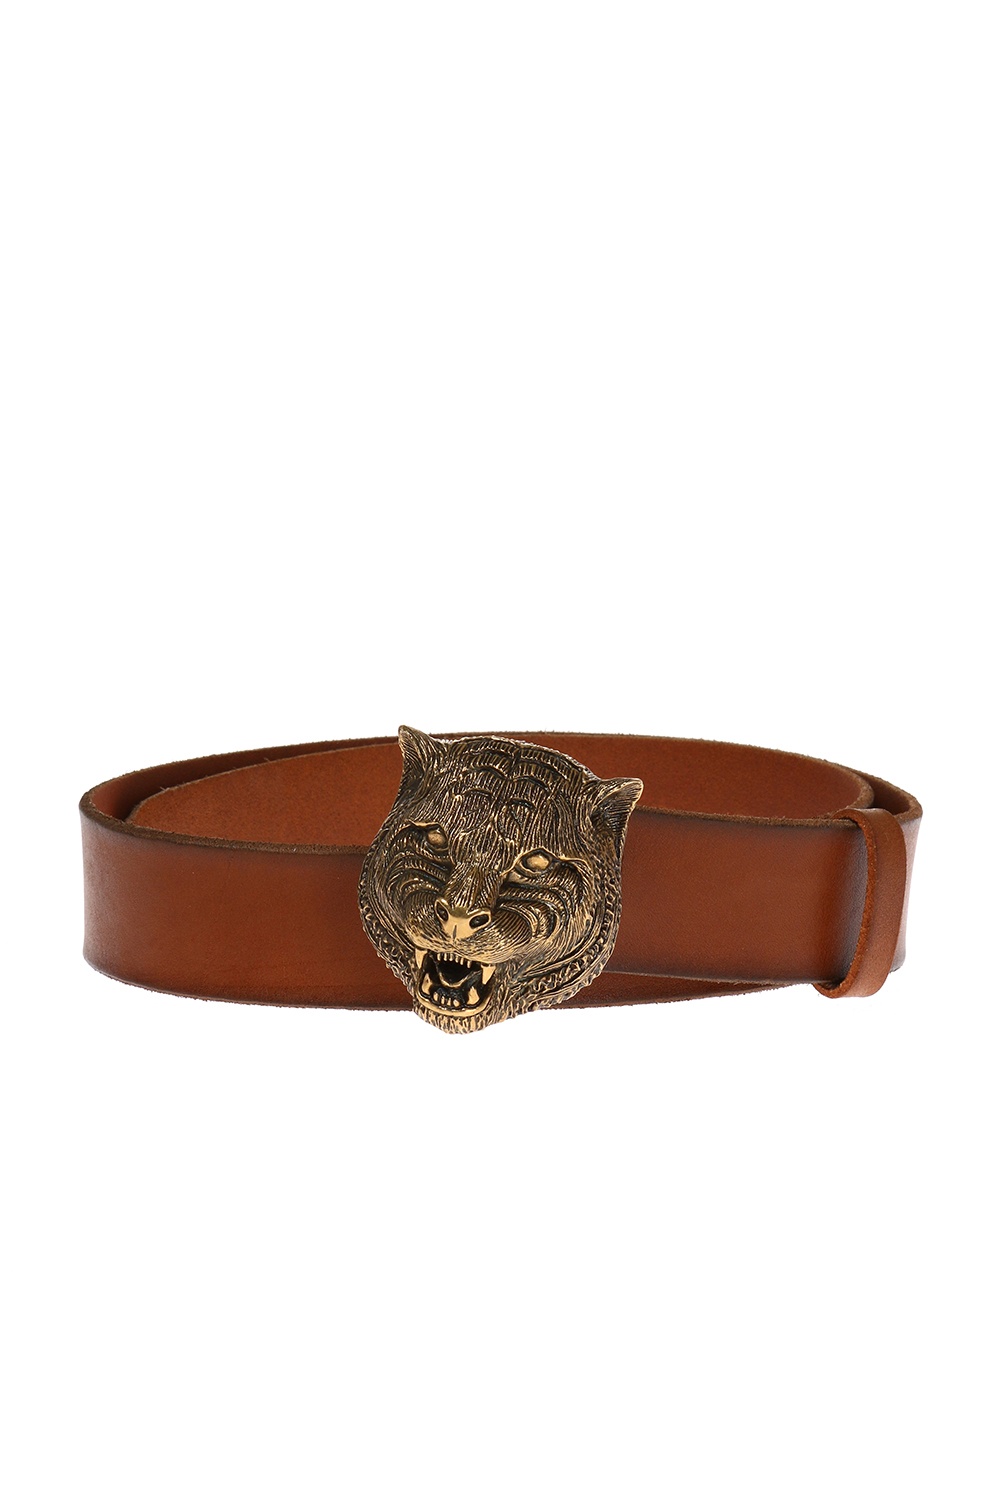 gucci belt with tiger